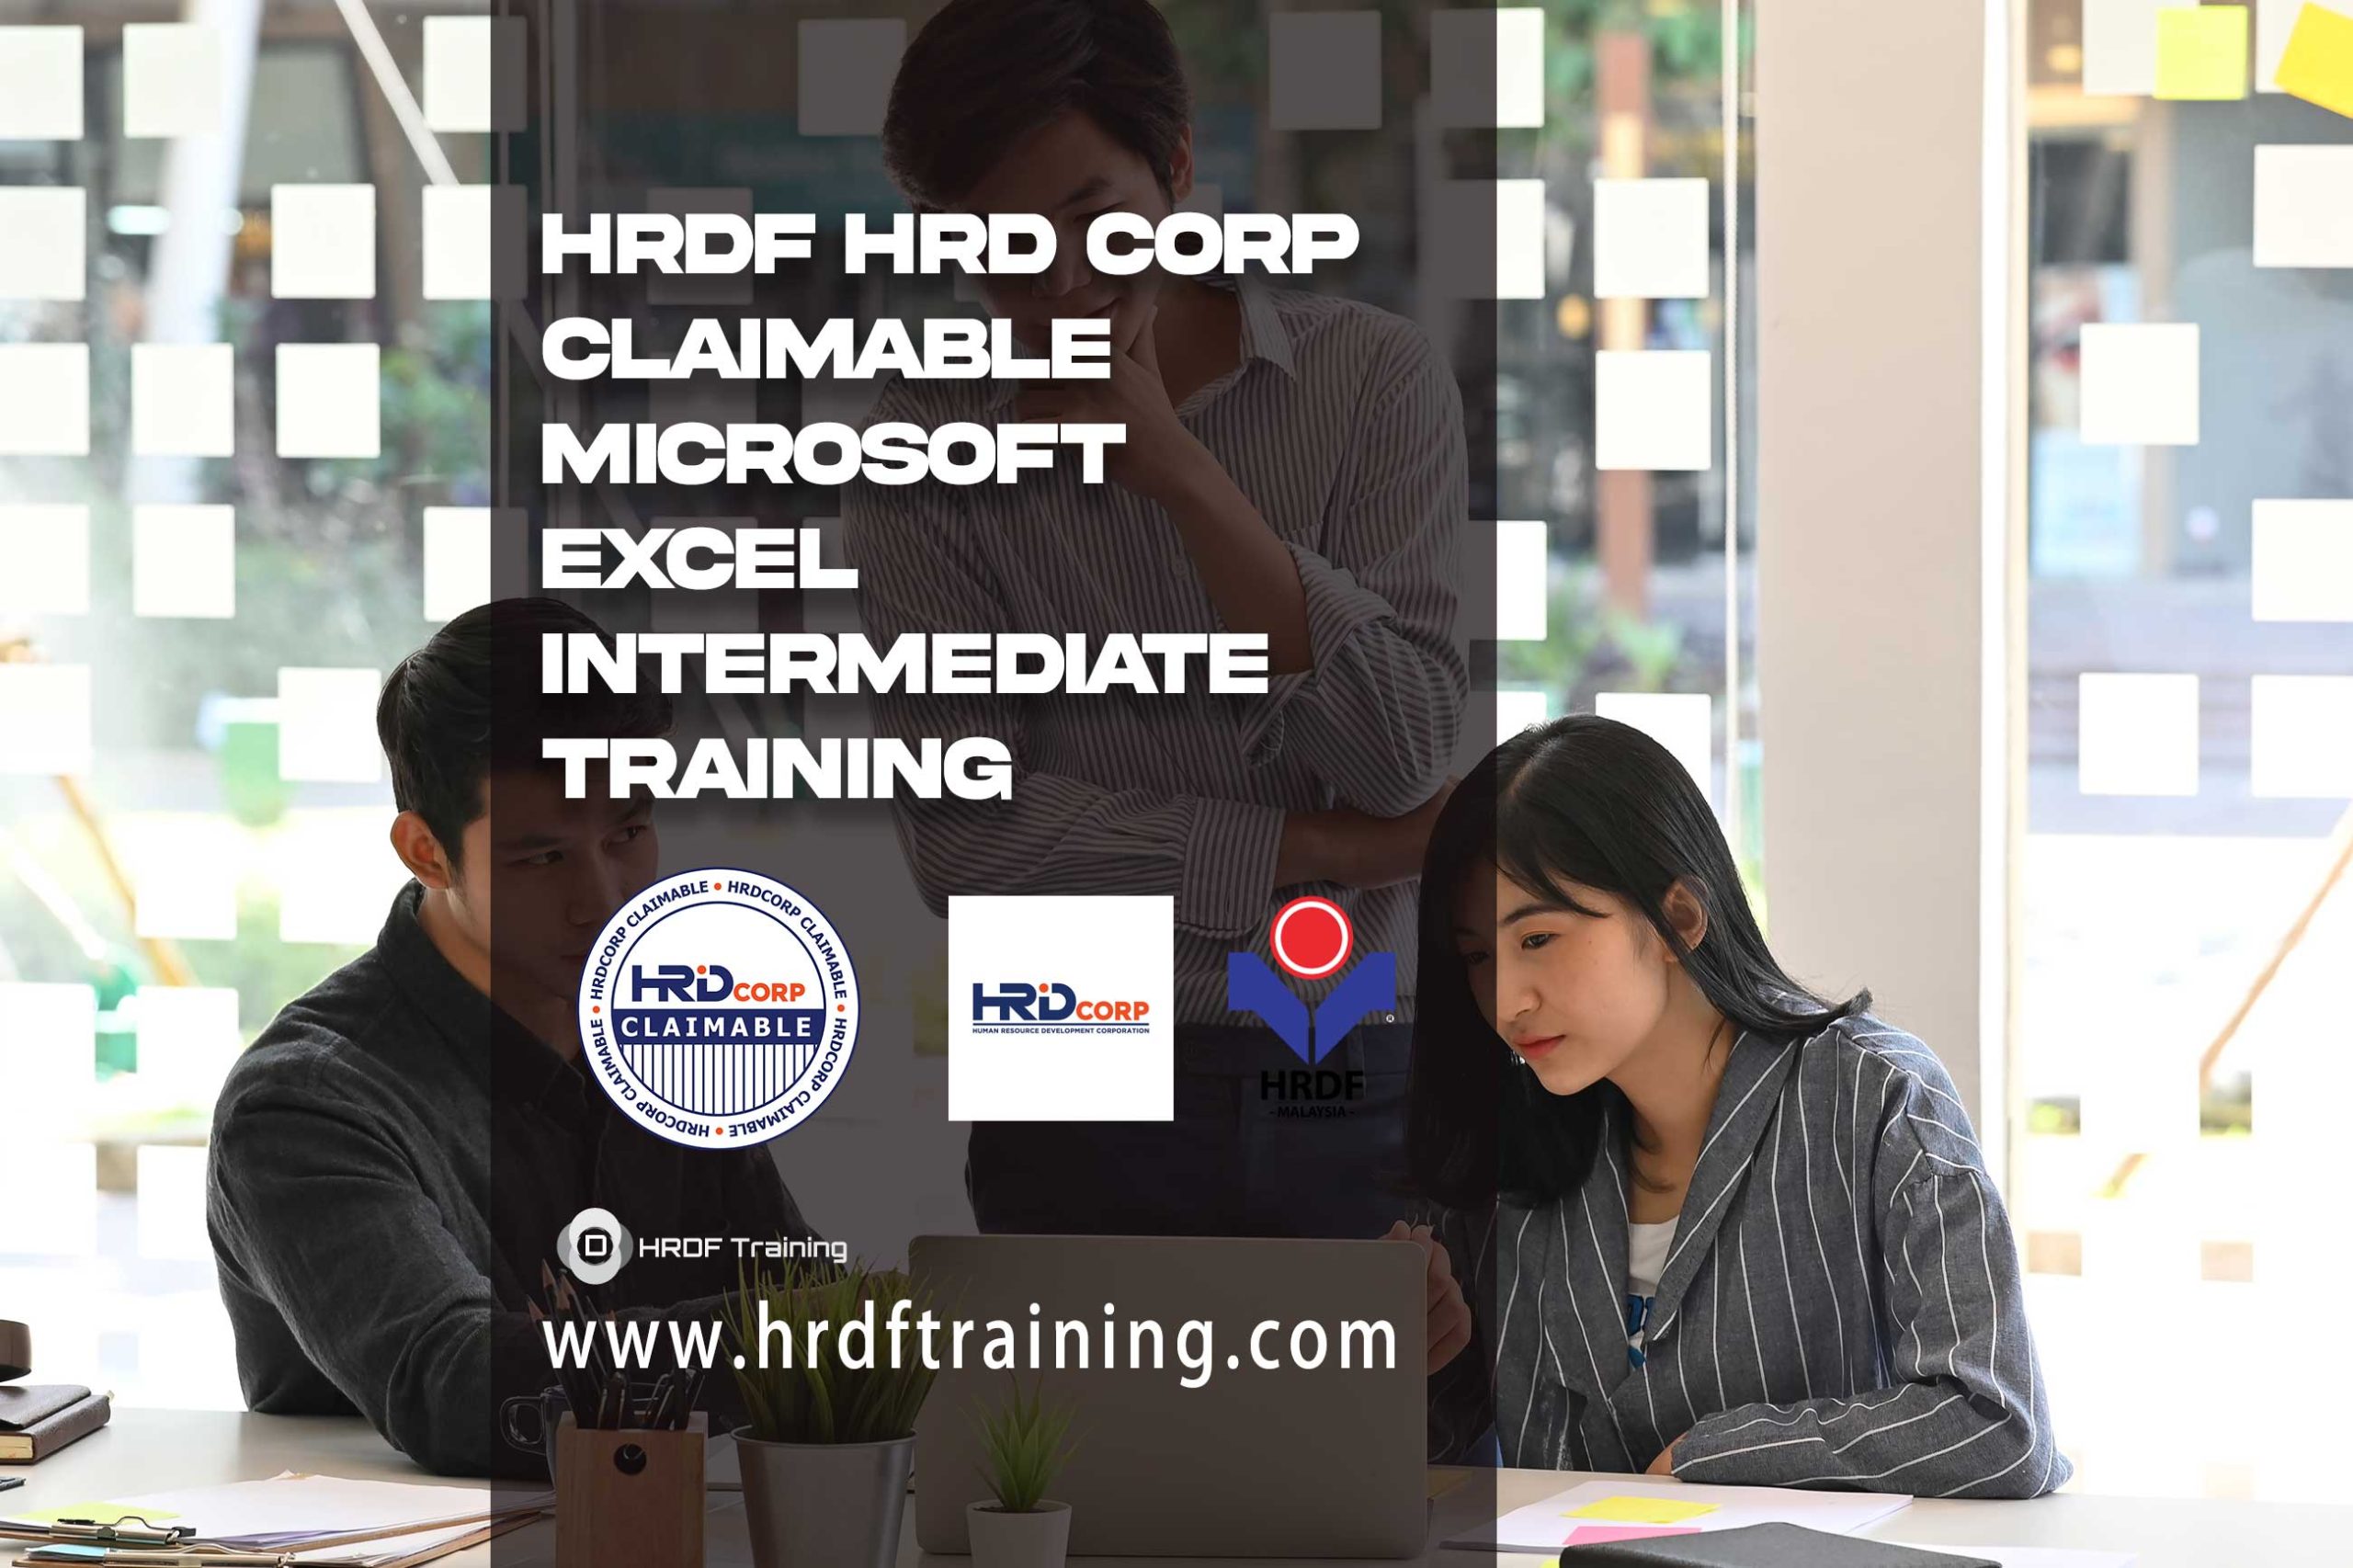 HRDF-HRD-Corp-Claimable-Microsoft-Excel-Intermediate-Training